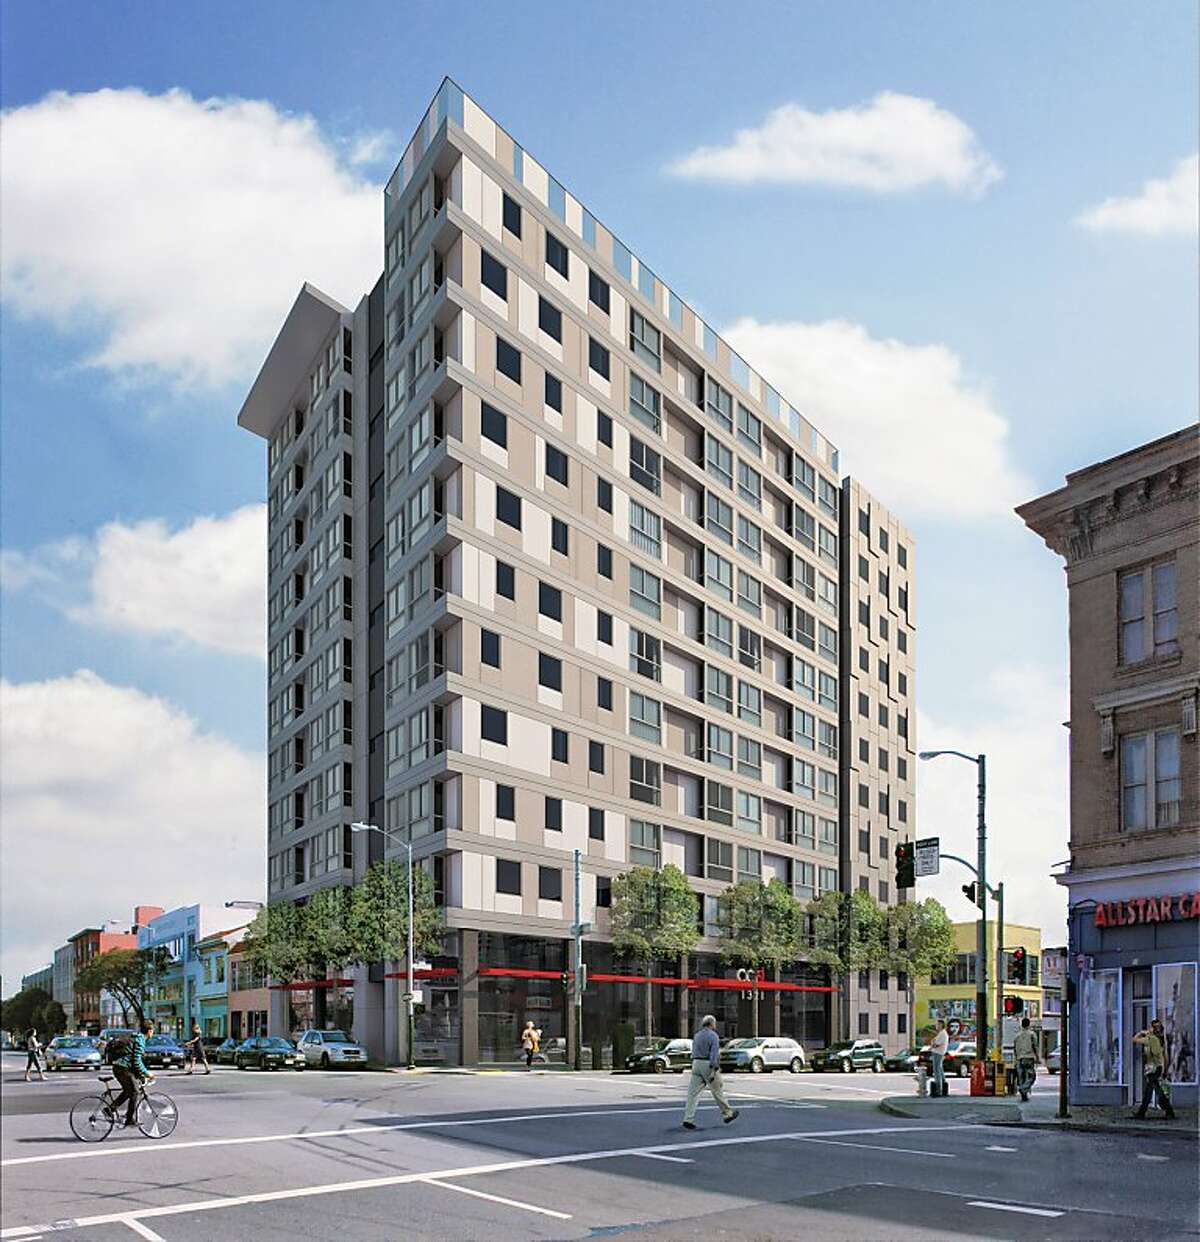 Microapartment complex at 9th and Mission Streets, San Francicso, being built in 2013. The complex is near the Twitter offices.